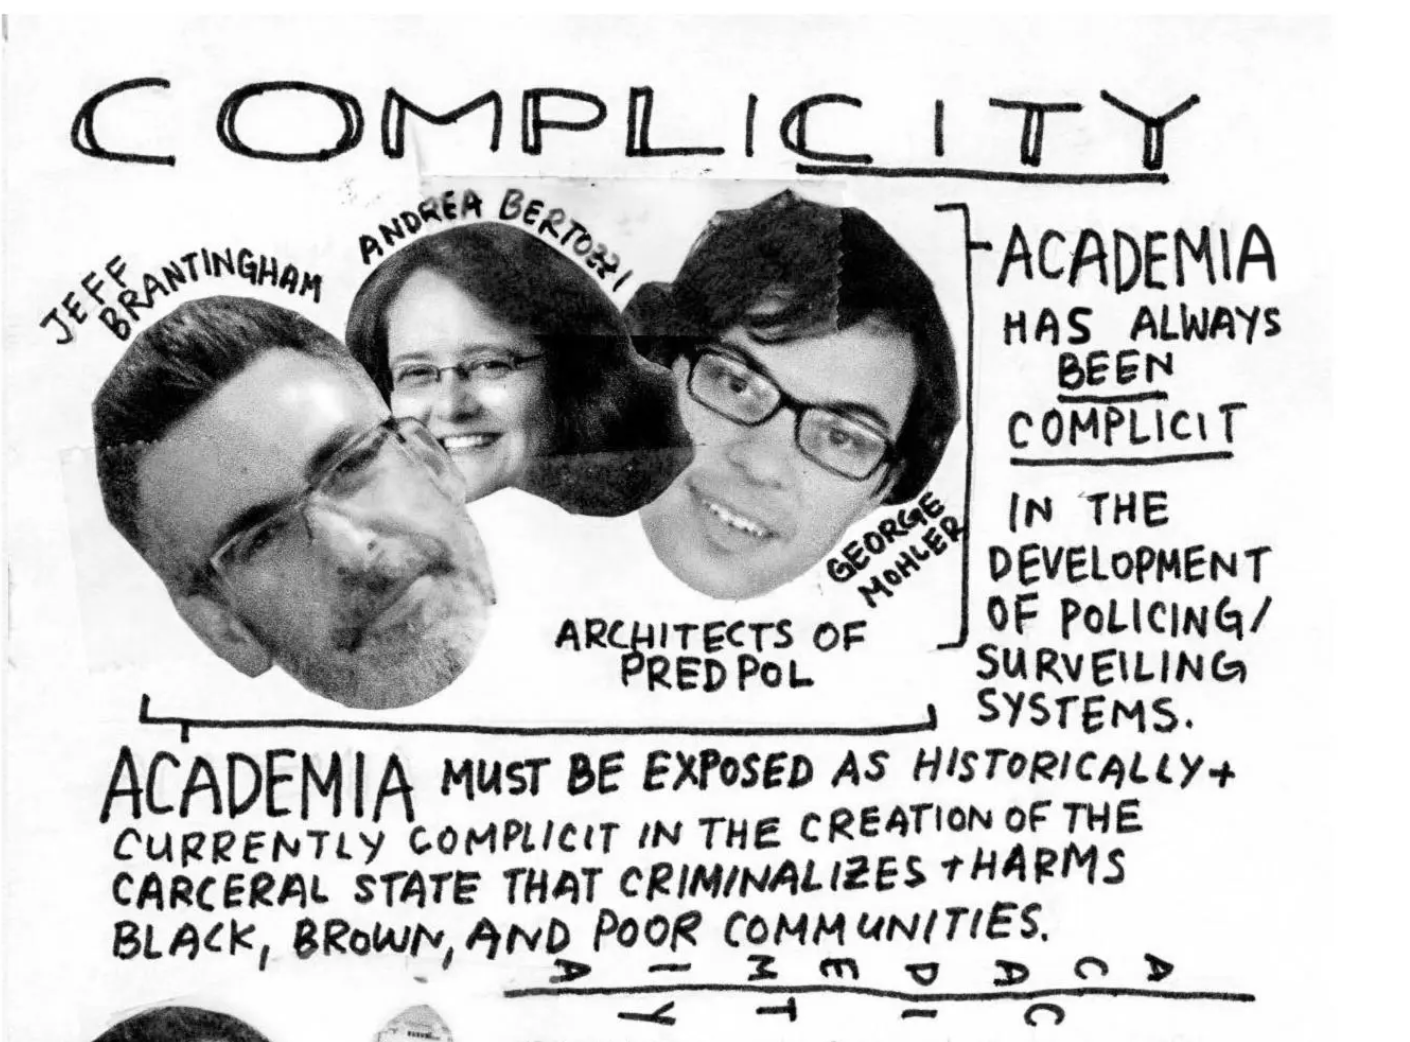 Academia has always been complicit in the development of policing surveilling systems.